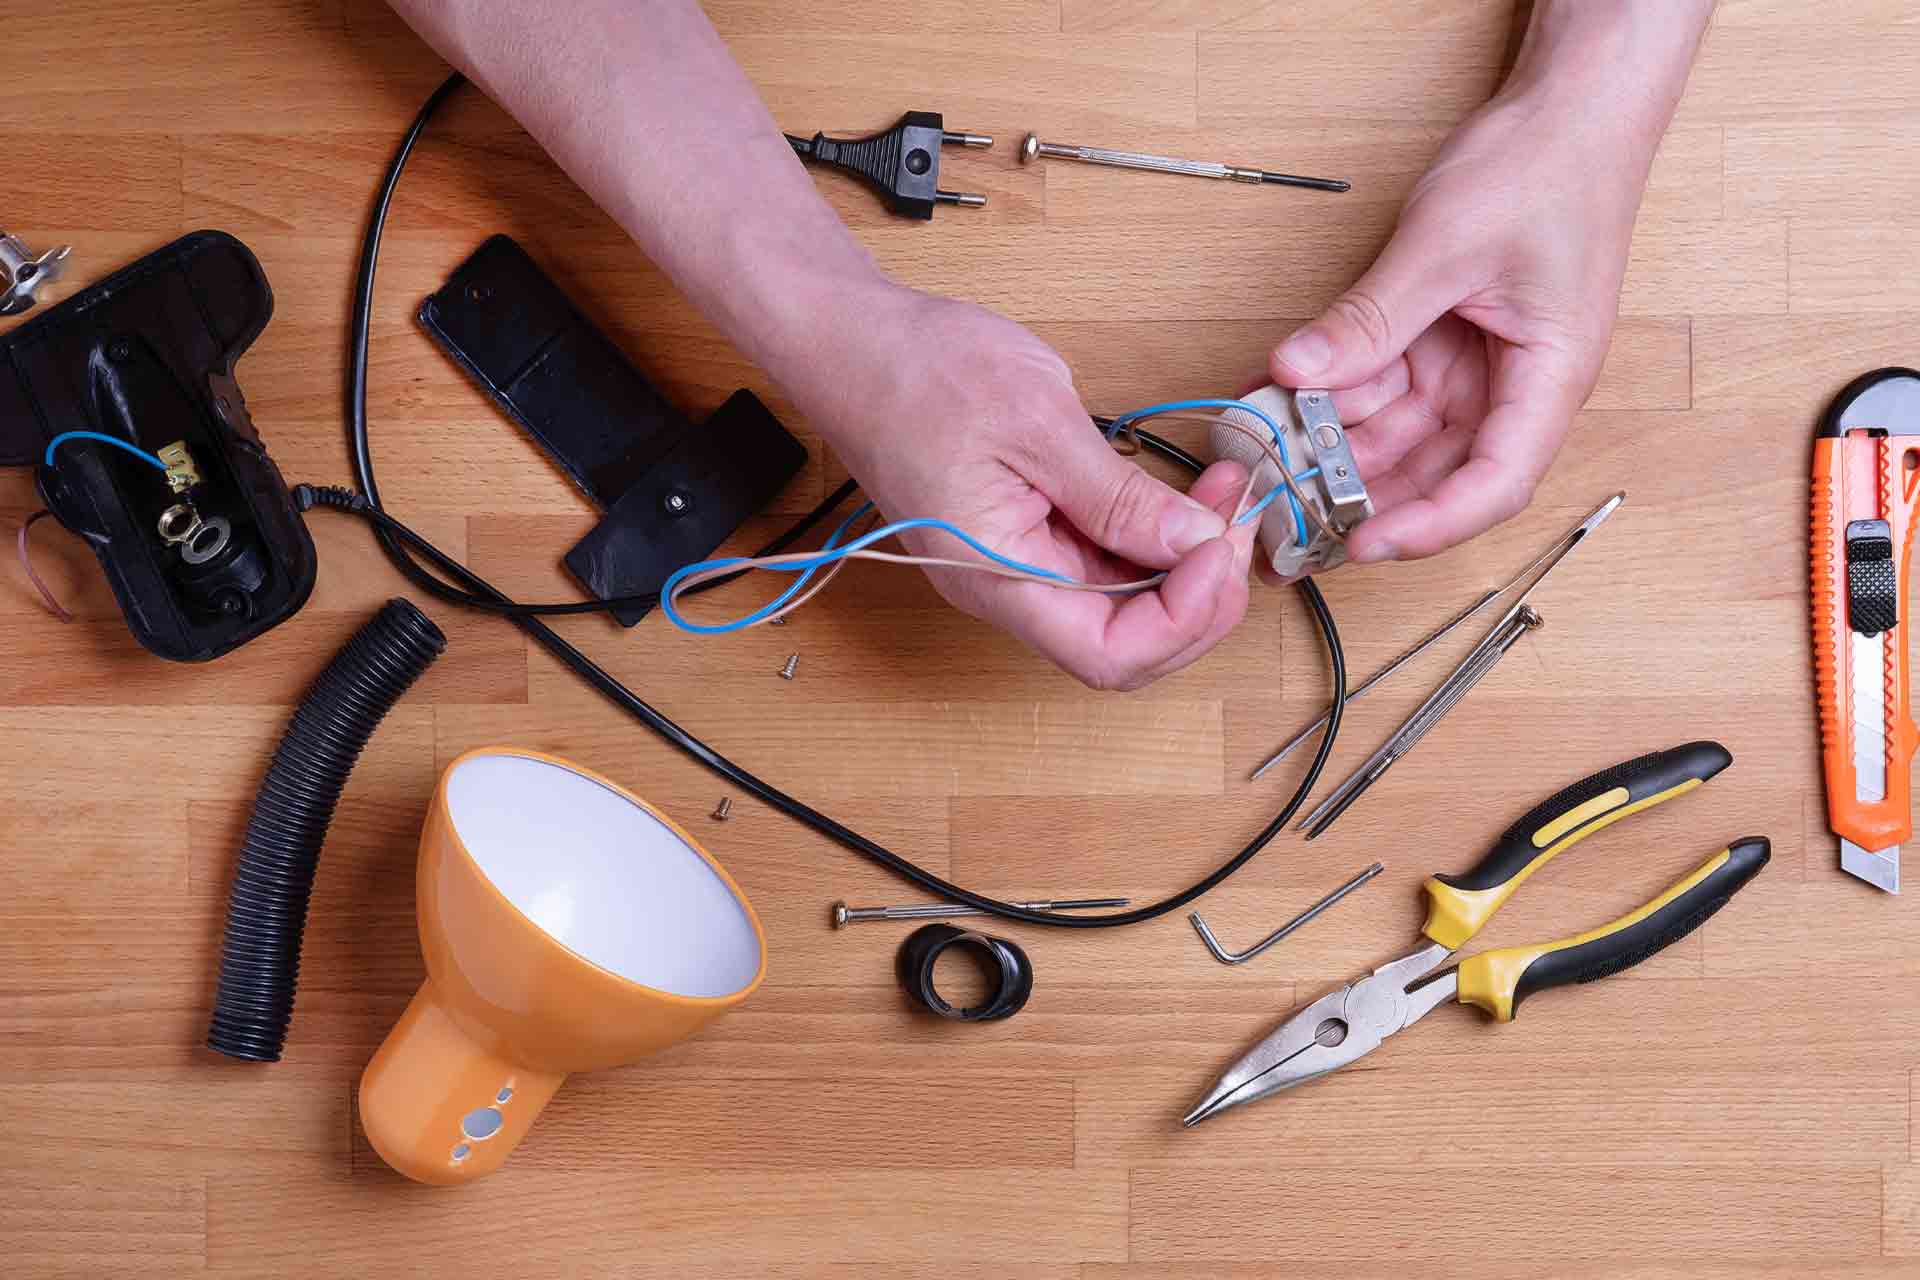 How To Replace An Electrical Cord On A Lamp